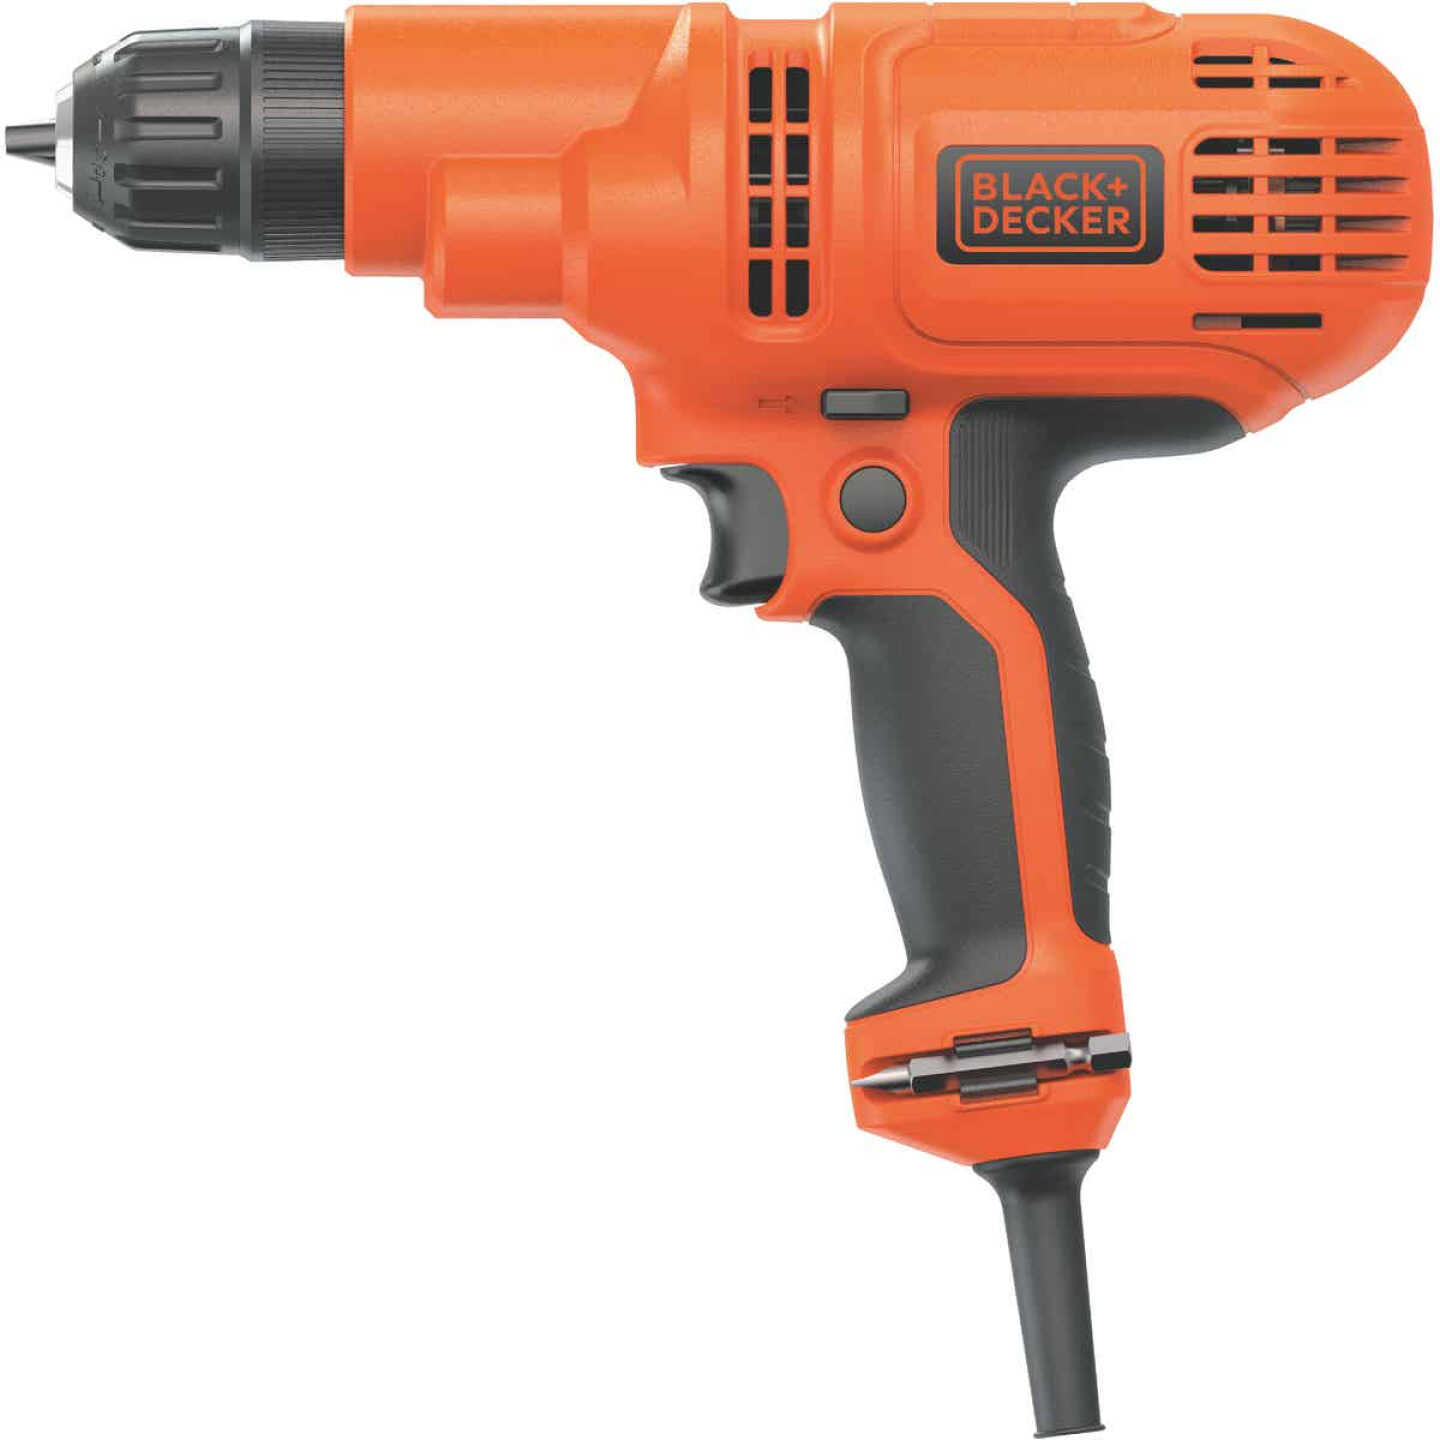 Black & Decker 3/8 In. 5.2-Amp Keyless Electric Drill/Driver Image 6